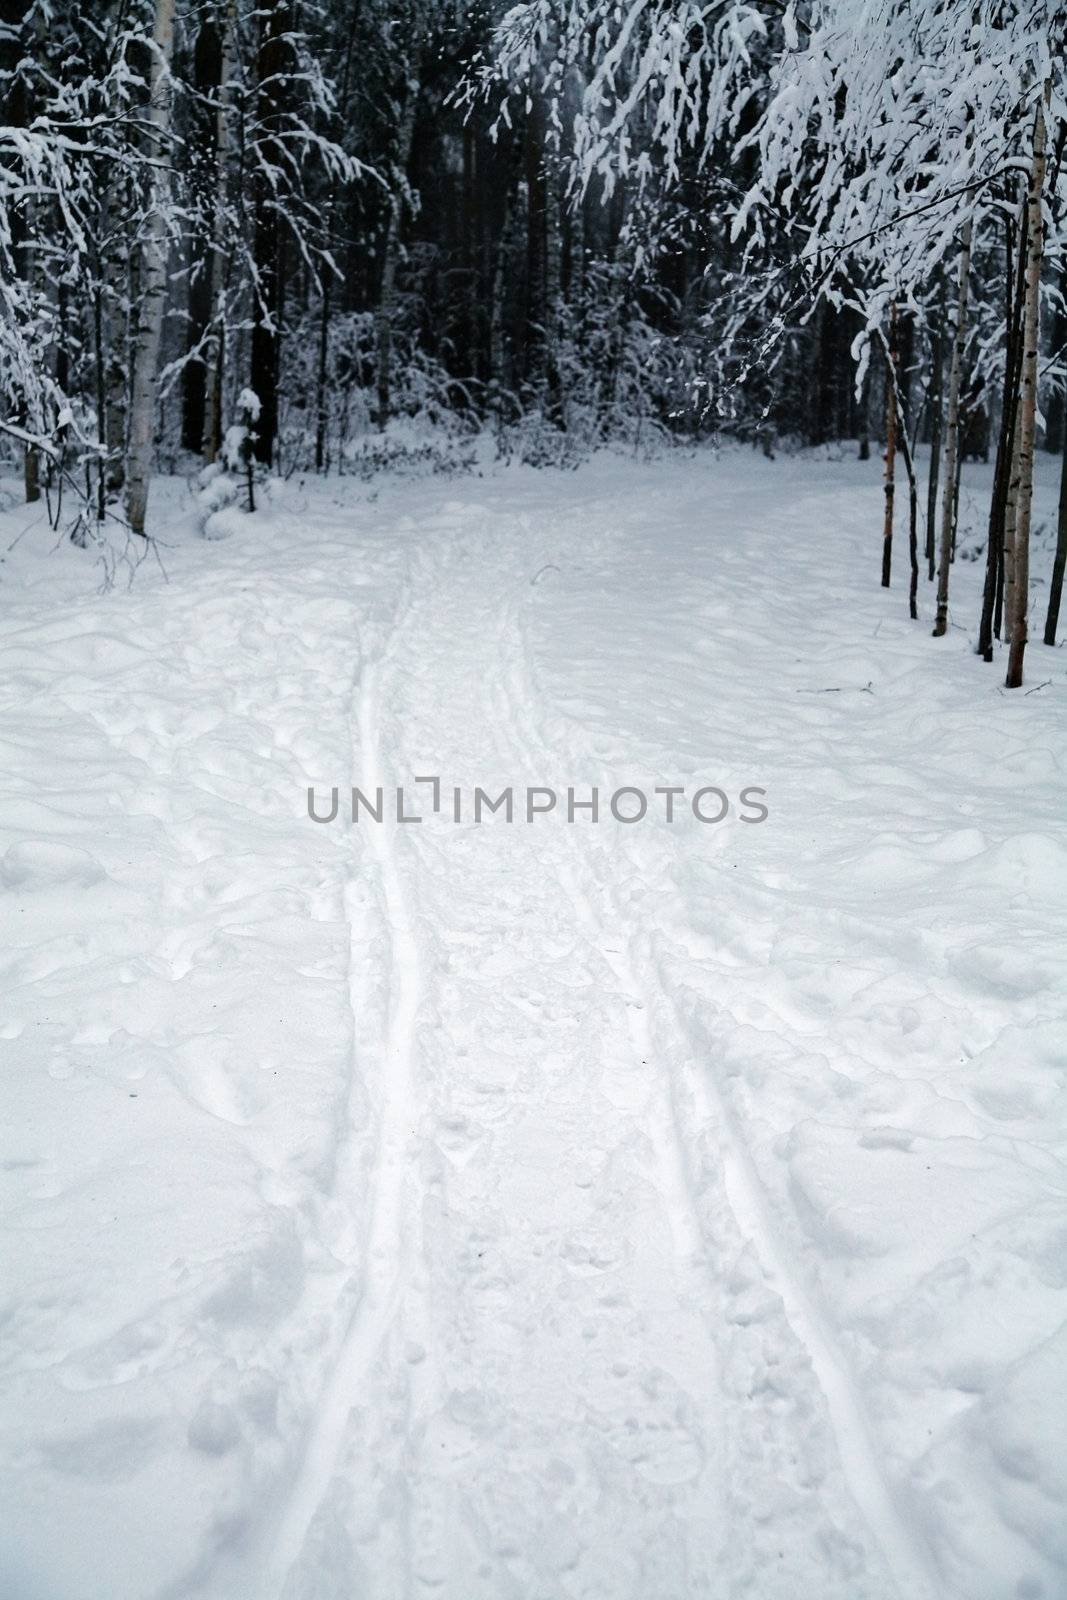 ski tracks in a forest by a winter evening